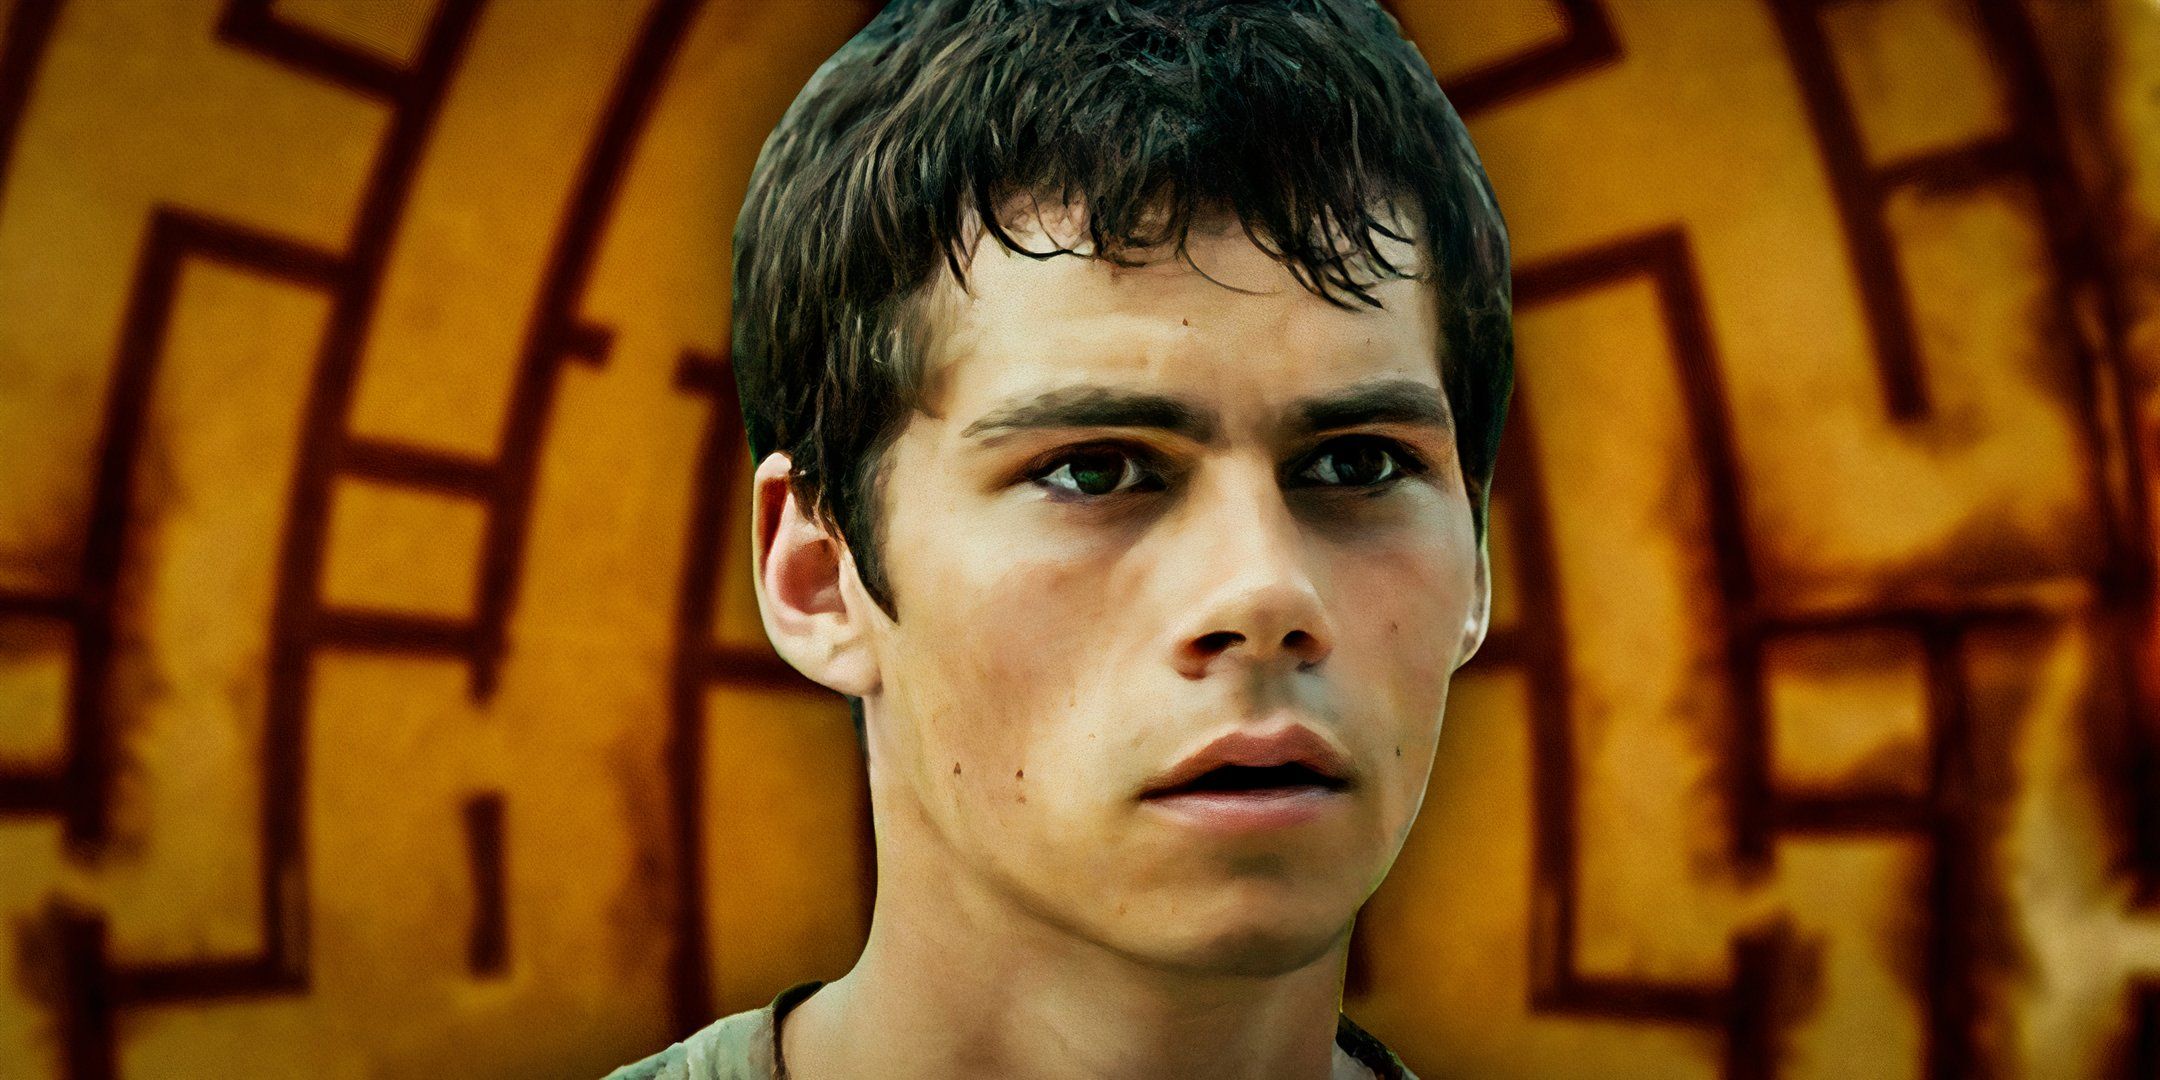 Thomas is in front of the maze in Maze Runner